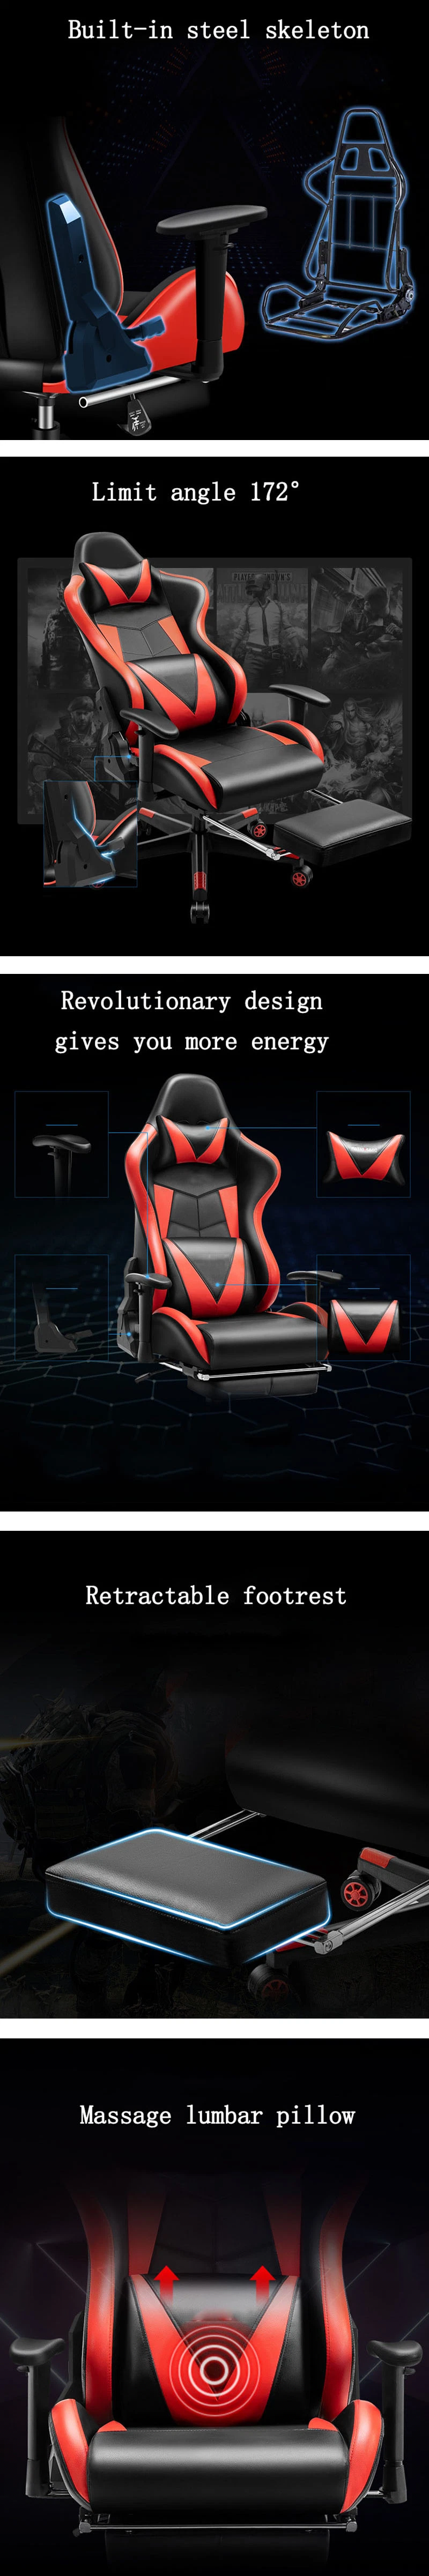 Racing Office PU Akracing Computer Caster The Best Swivel New No Wheels Design Used Genuine Leather X Gaming Chair